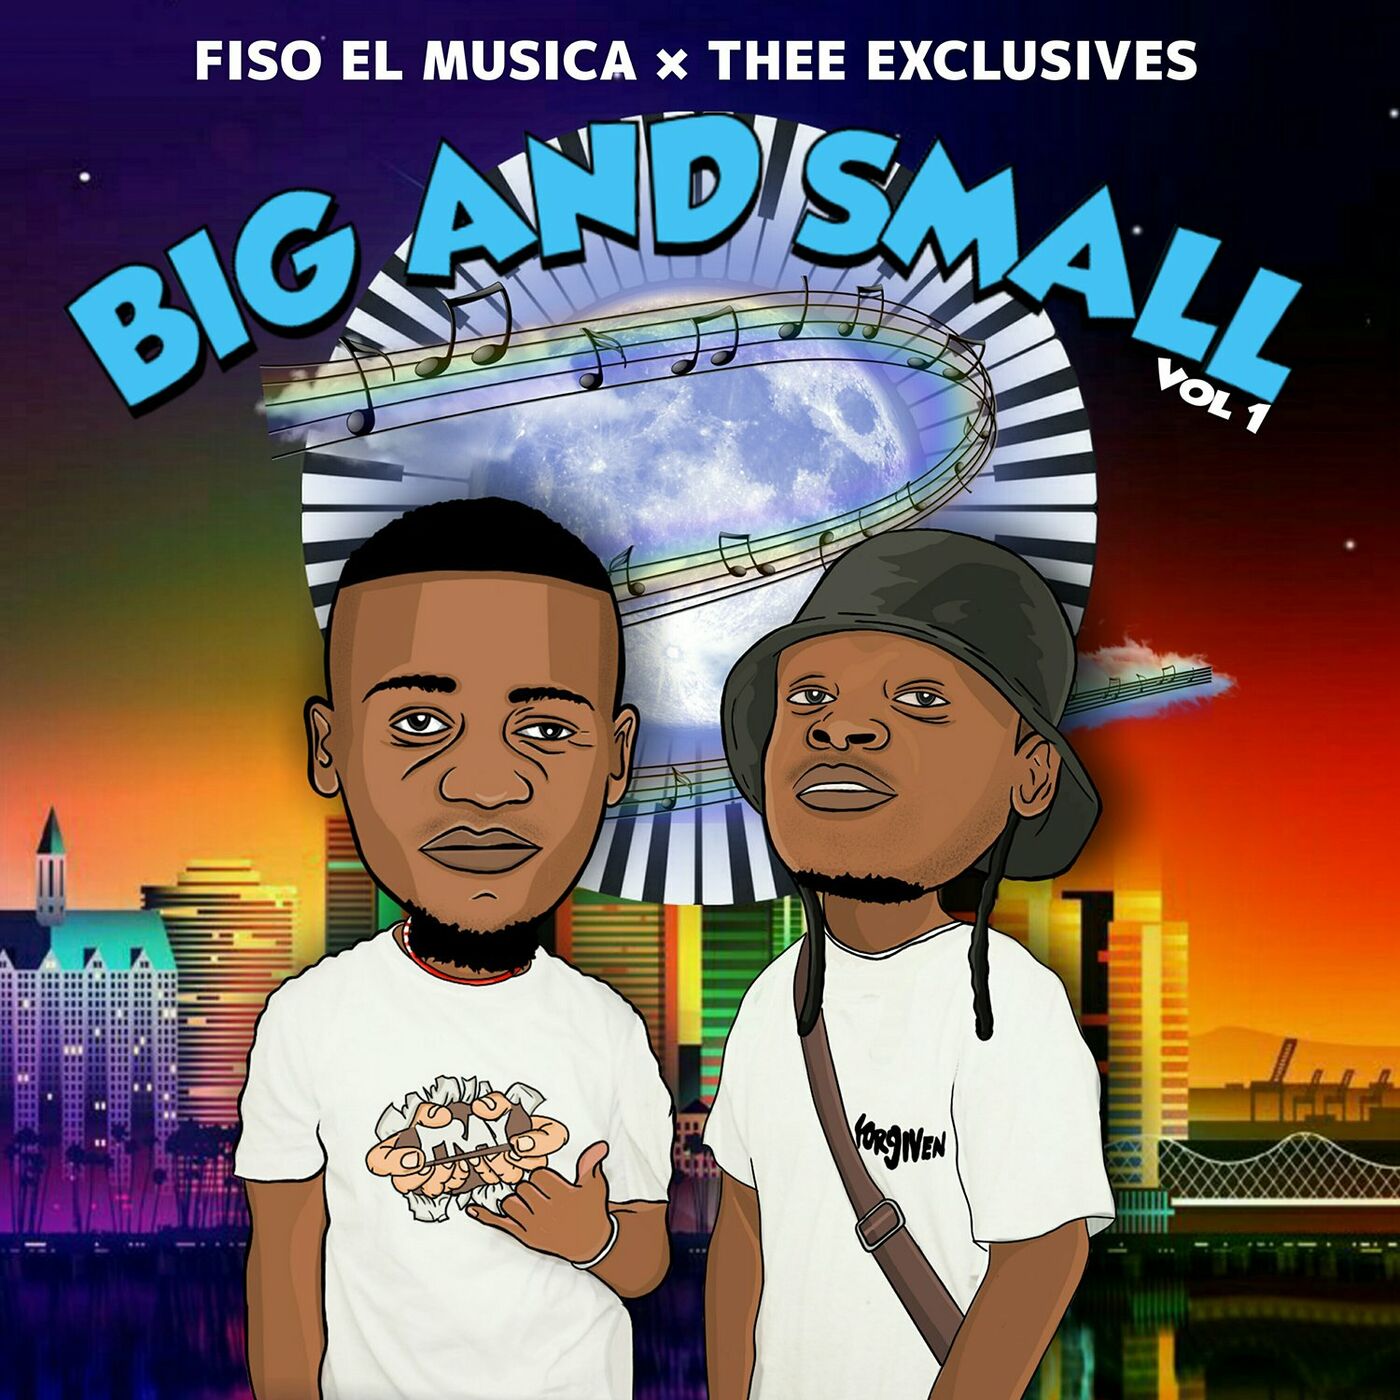 Fiso El Musical & Thee Exclusives - Big And Small, Vol. 1